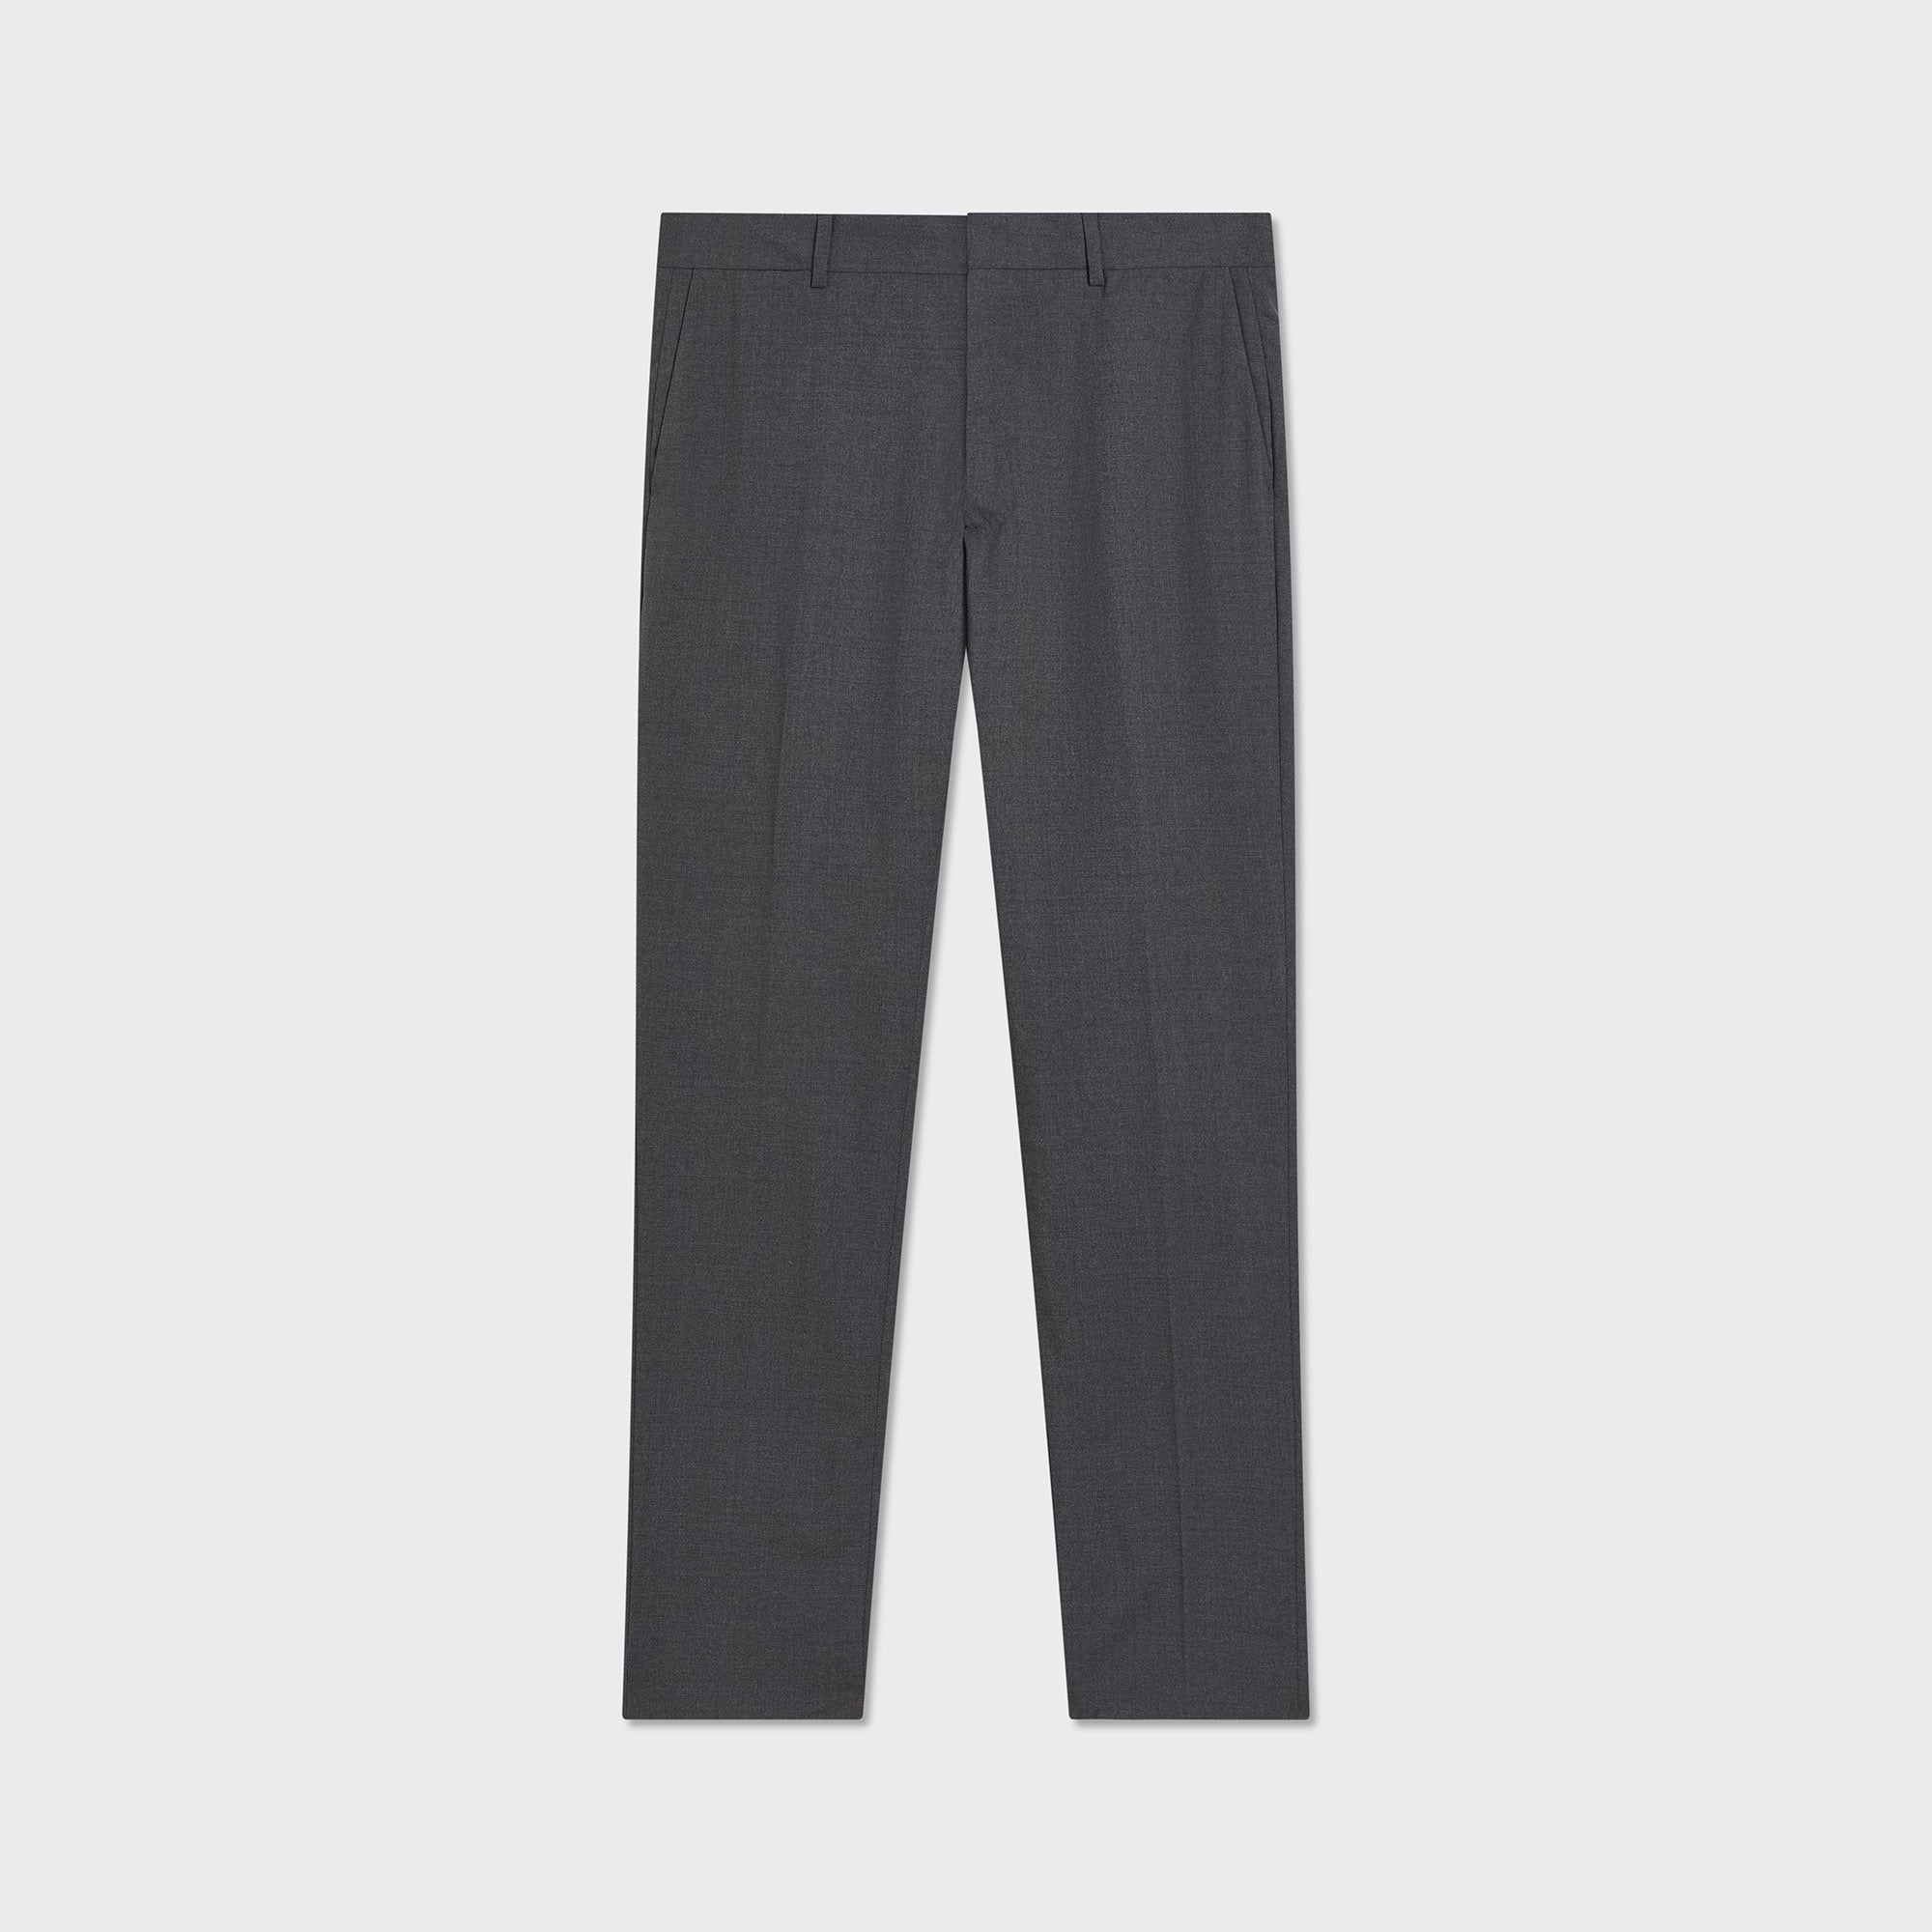 Y's for men Wool Pants (Trousers) Camel S | PLAYFUL